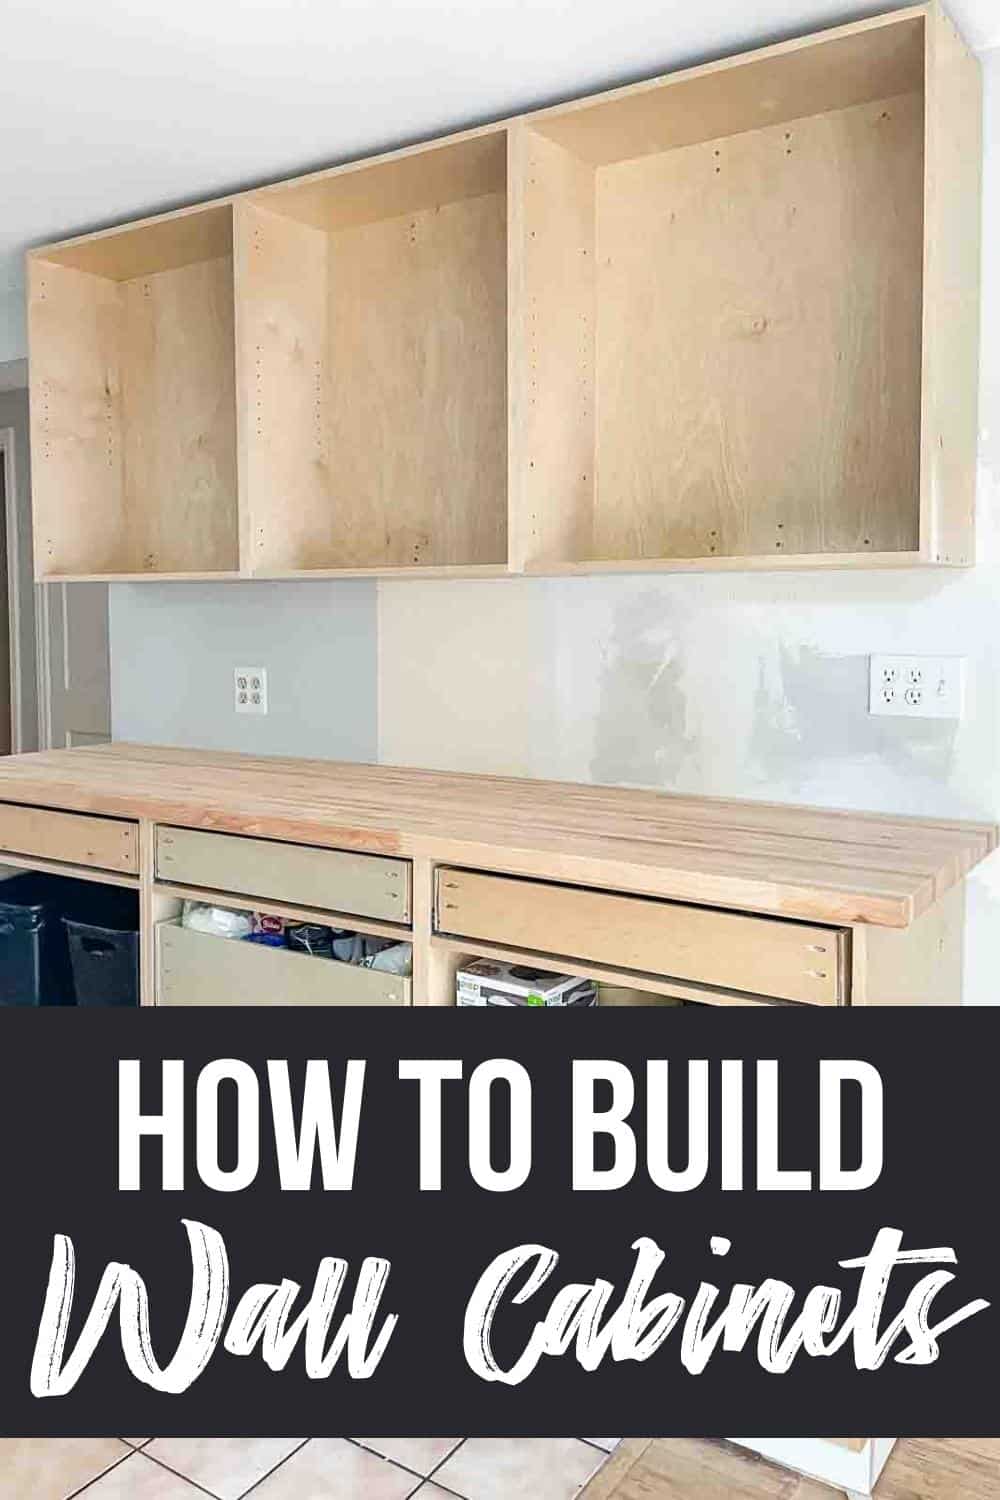 https://www.thehandymansdaughter.com/wp-content/uploads/2021/11/How-to-build-wall-cabinets-Pin-1.jpeg